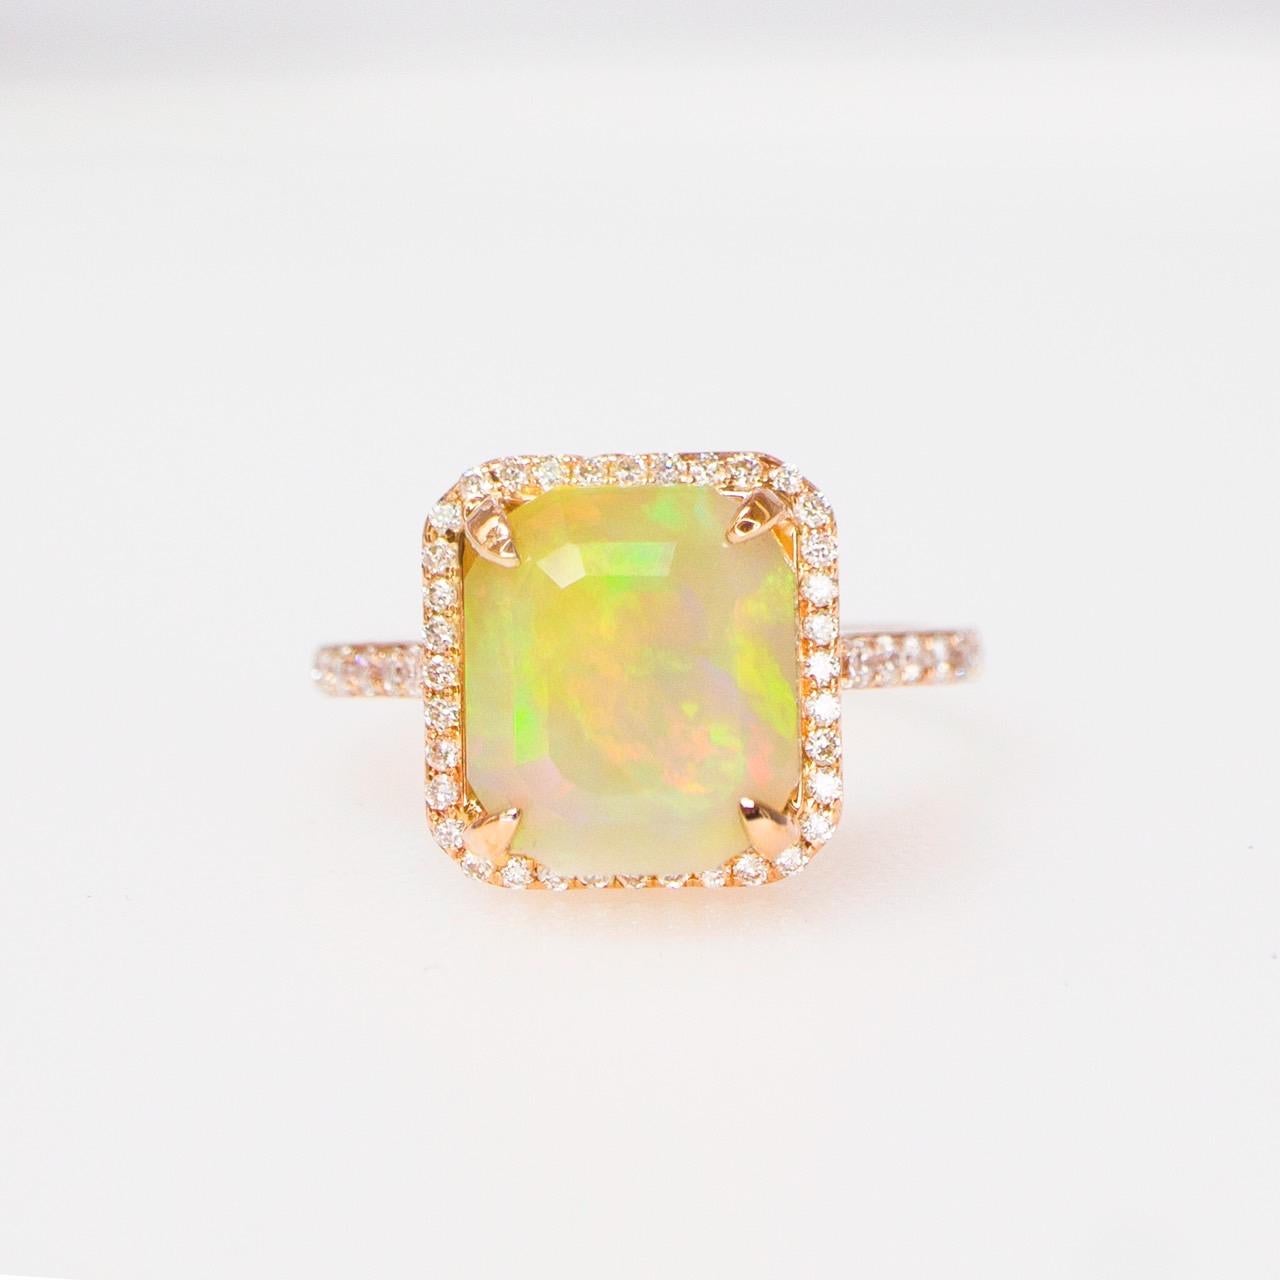 *IGI 14K 3.50 ct  Natural Color Play Opal Diamonds Antique Engagement Ring*
This ring features a 3.50 carat natural orange Opal that is IGI-Certified, with a color-play effect. It is set on a 14K rose gold band and accented with FG VS diamonds